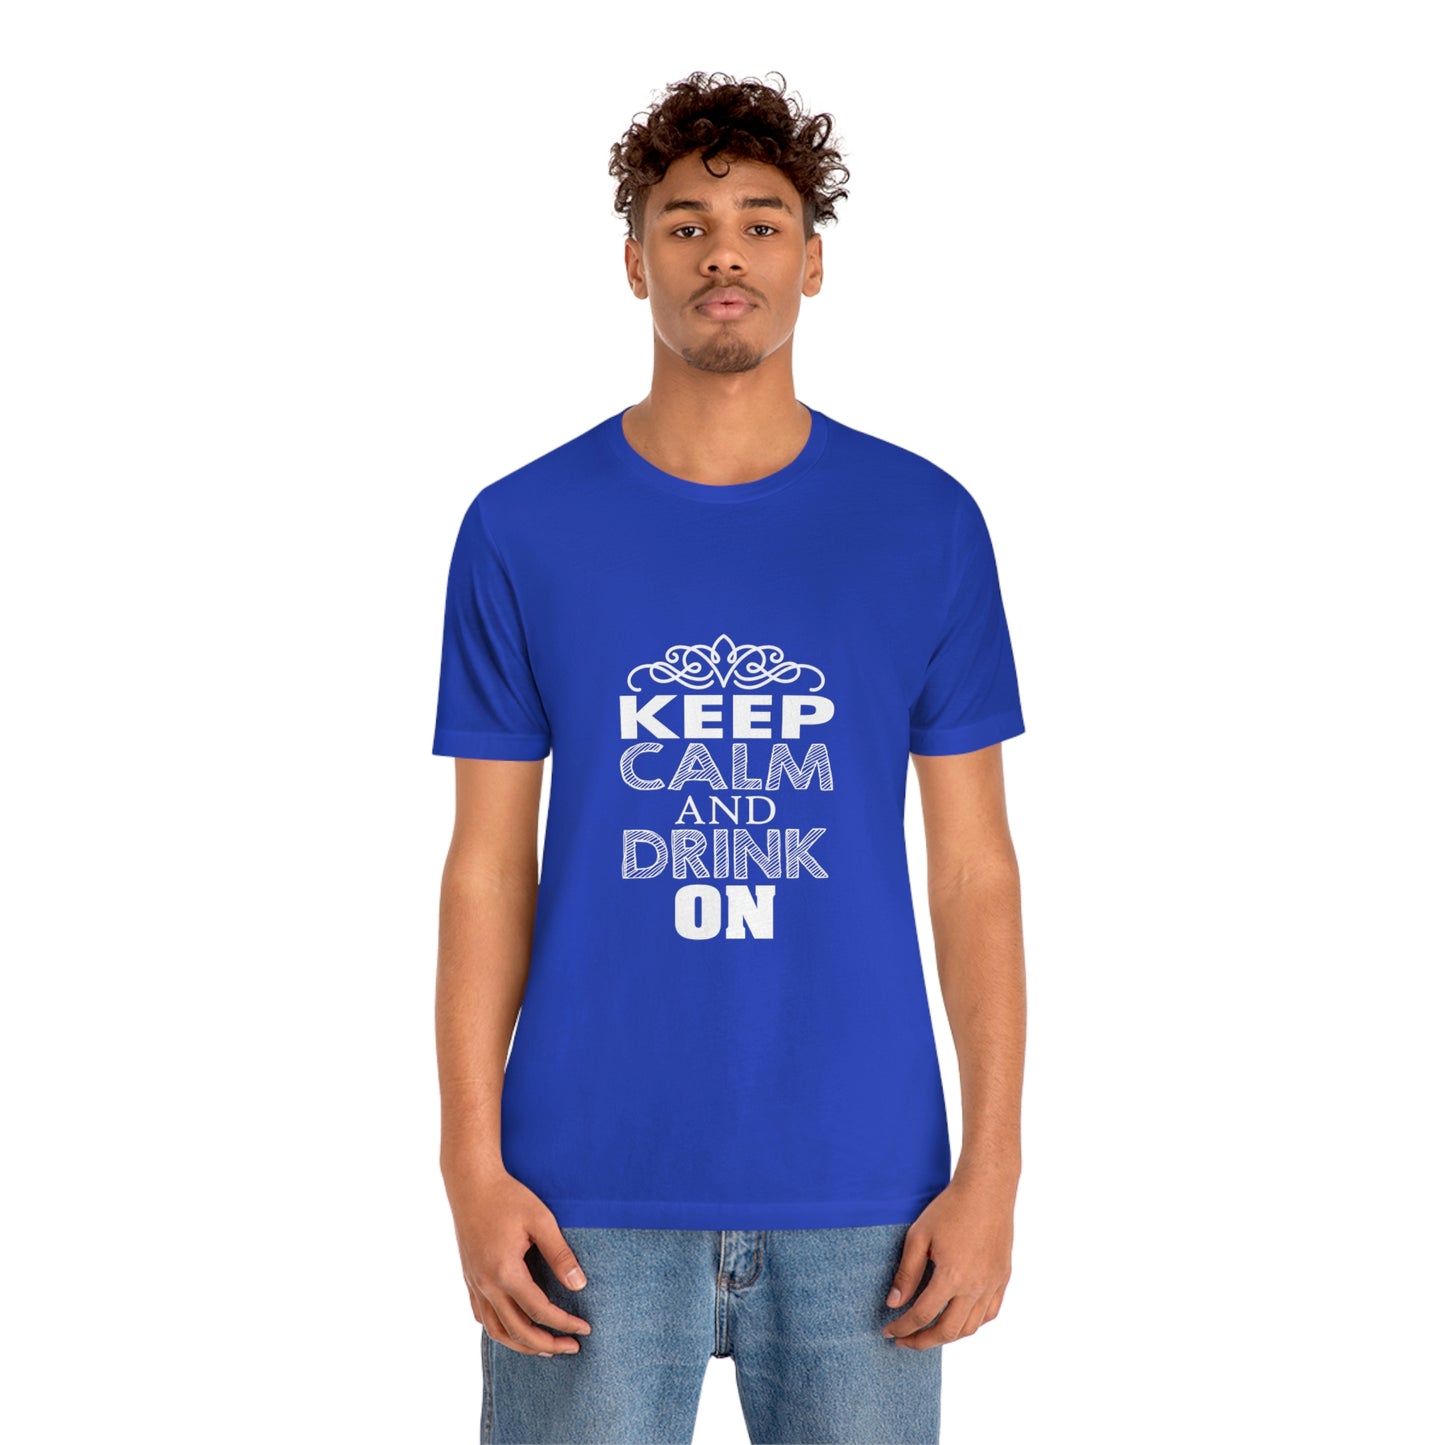 Keep Calm And Drink On - Unisex T-Shirt